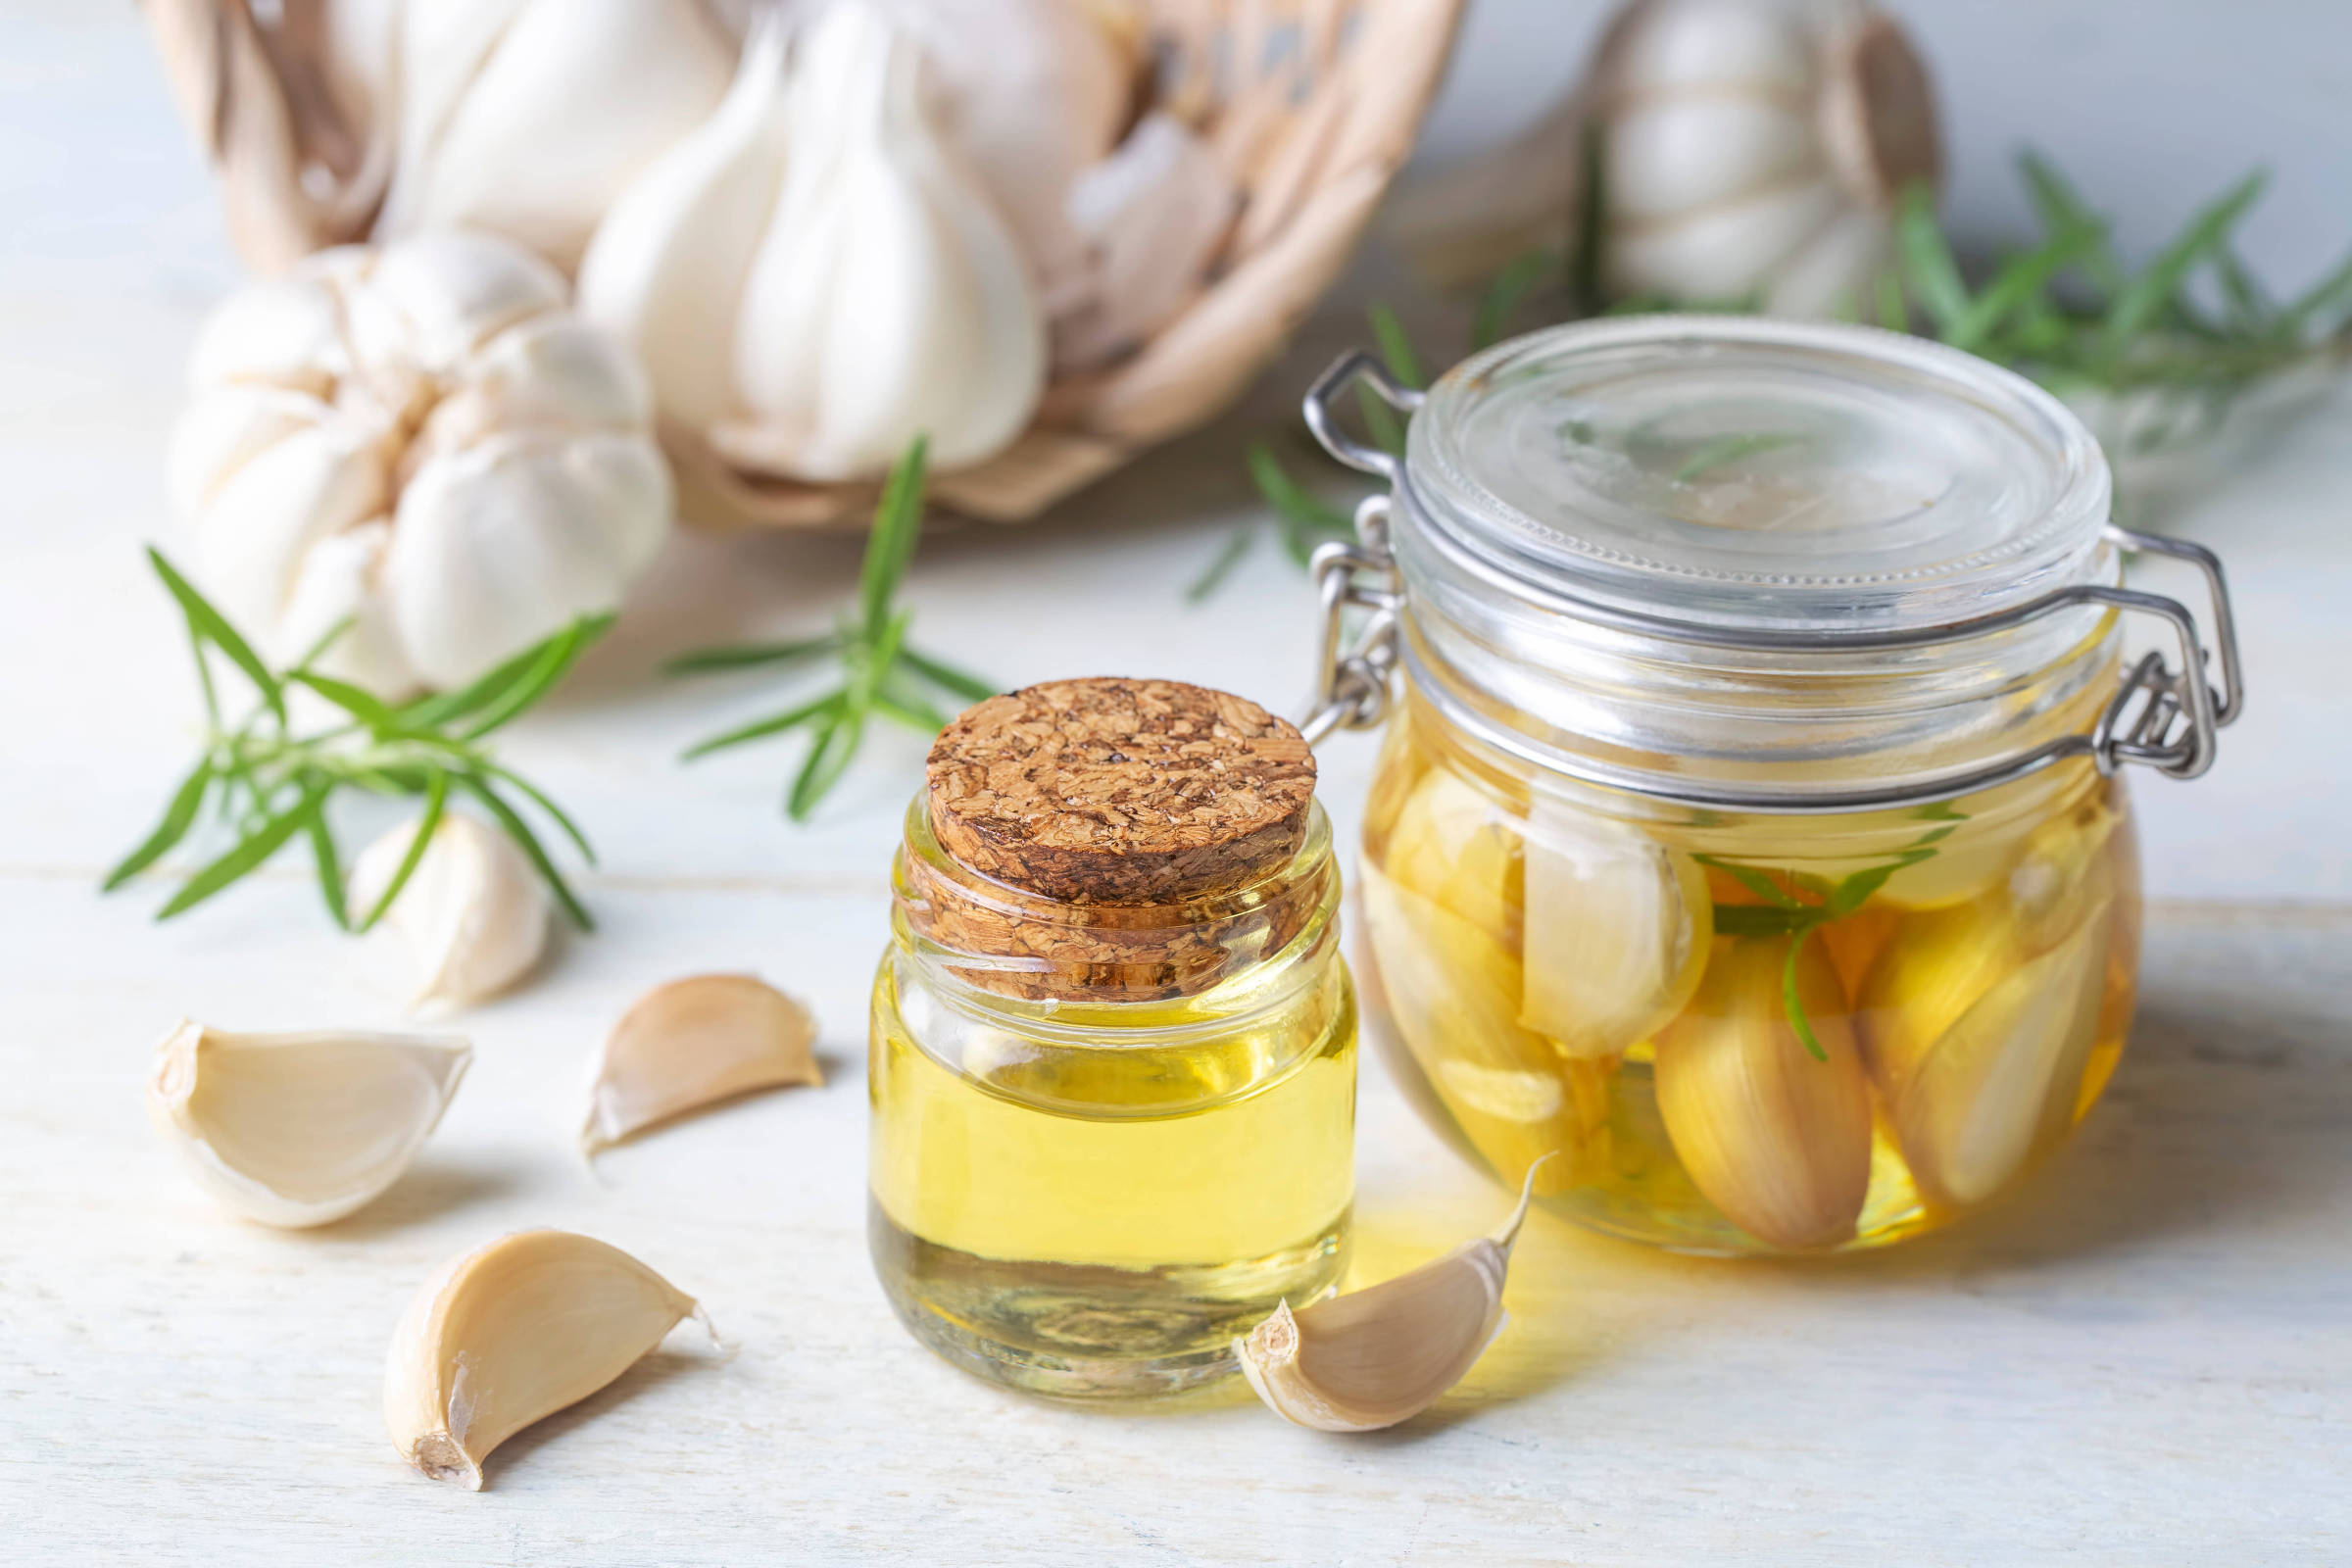 Garlic in olive oil: canning saves time in the kitchen – 03/19/2023 – Food